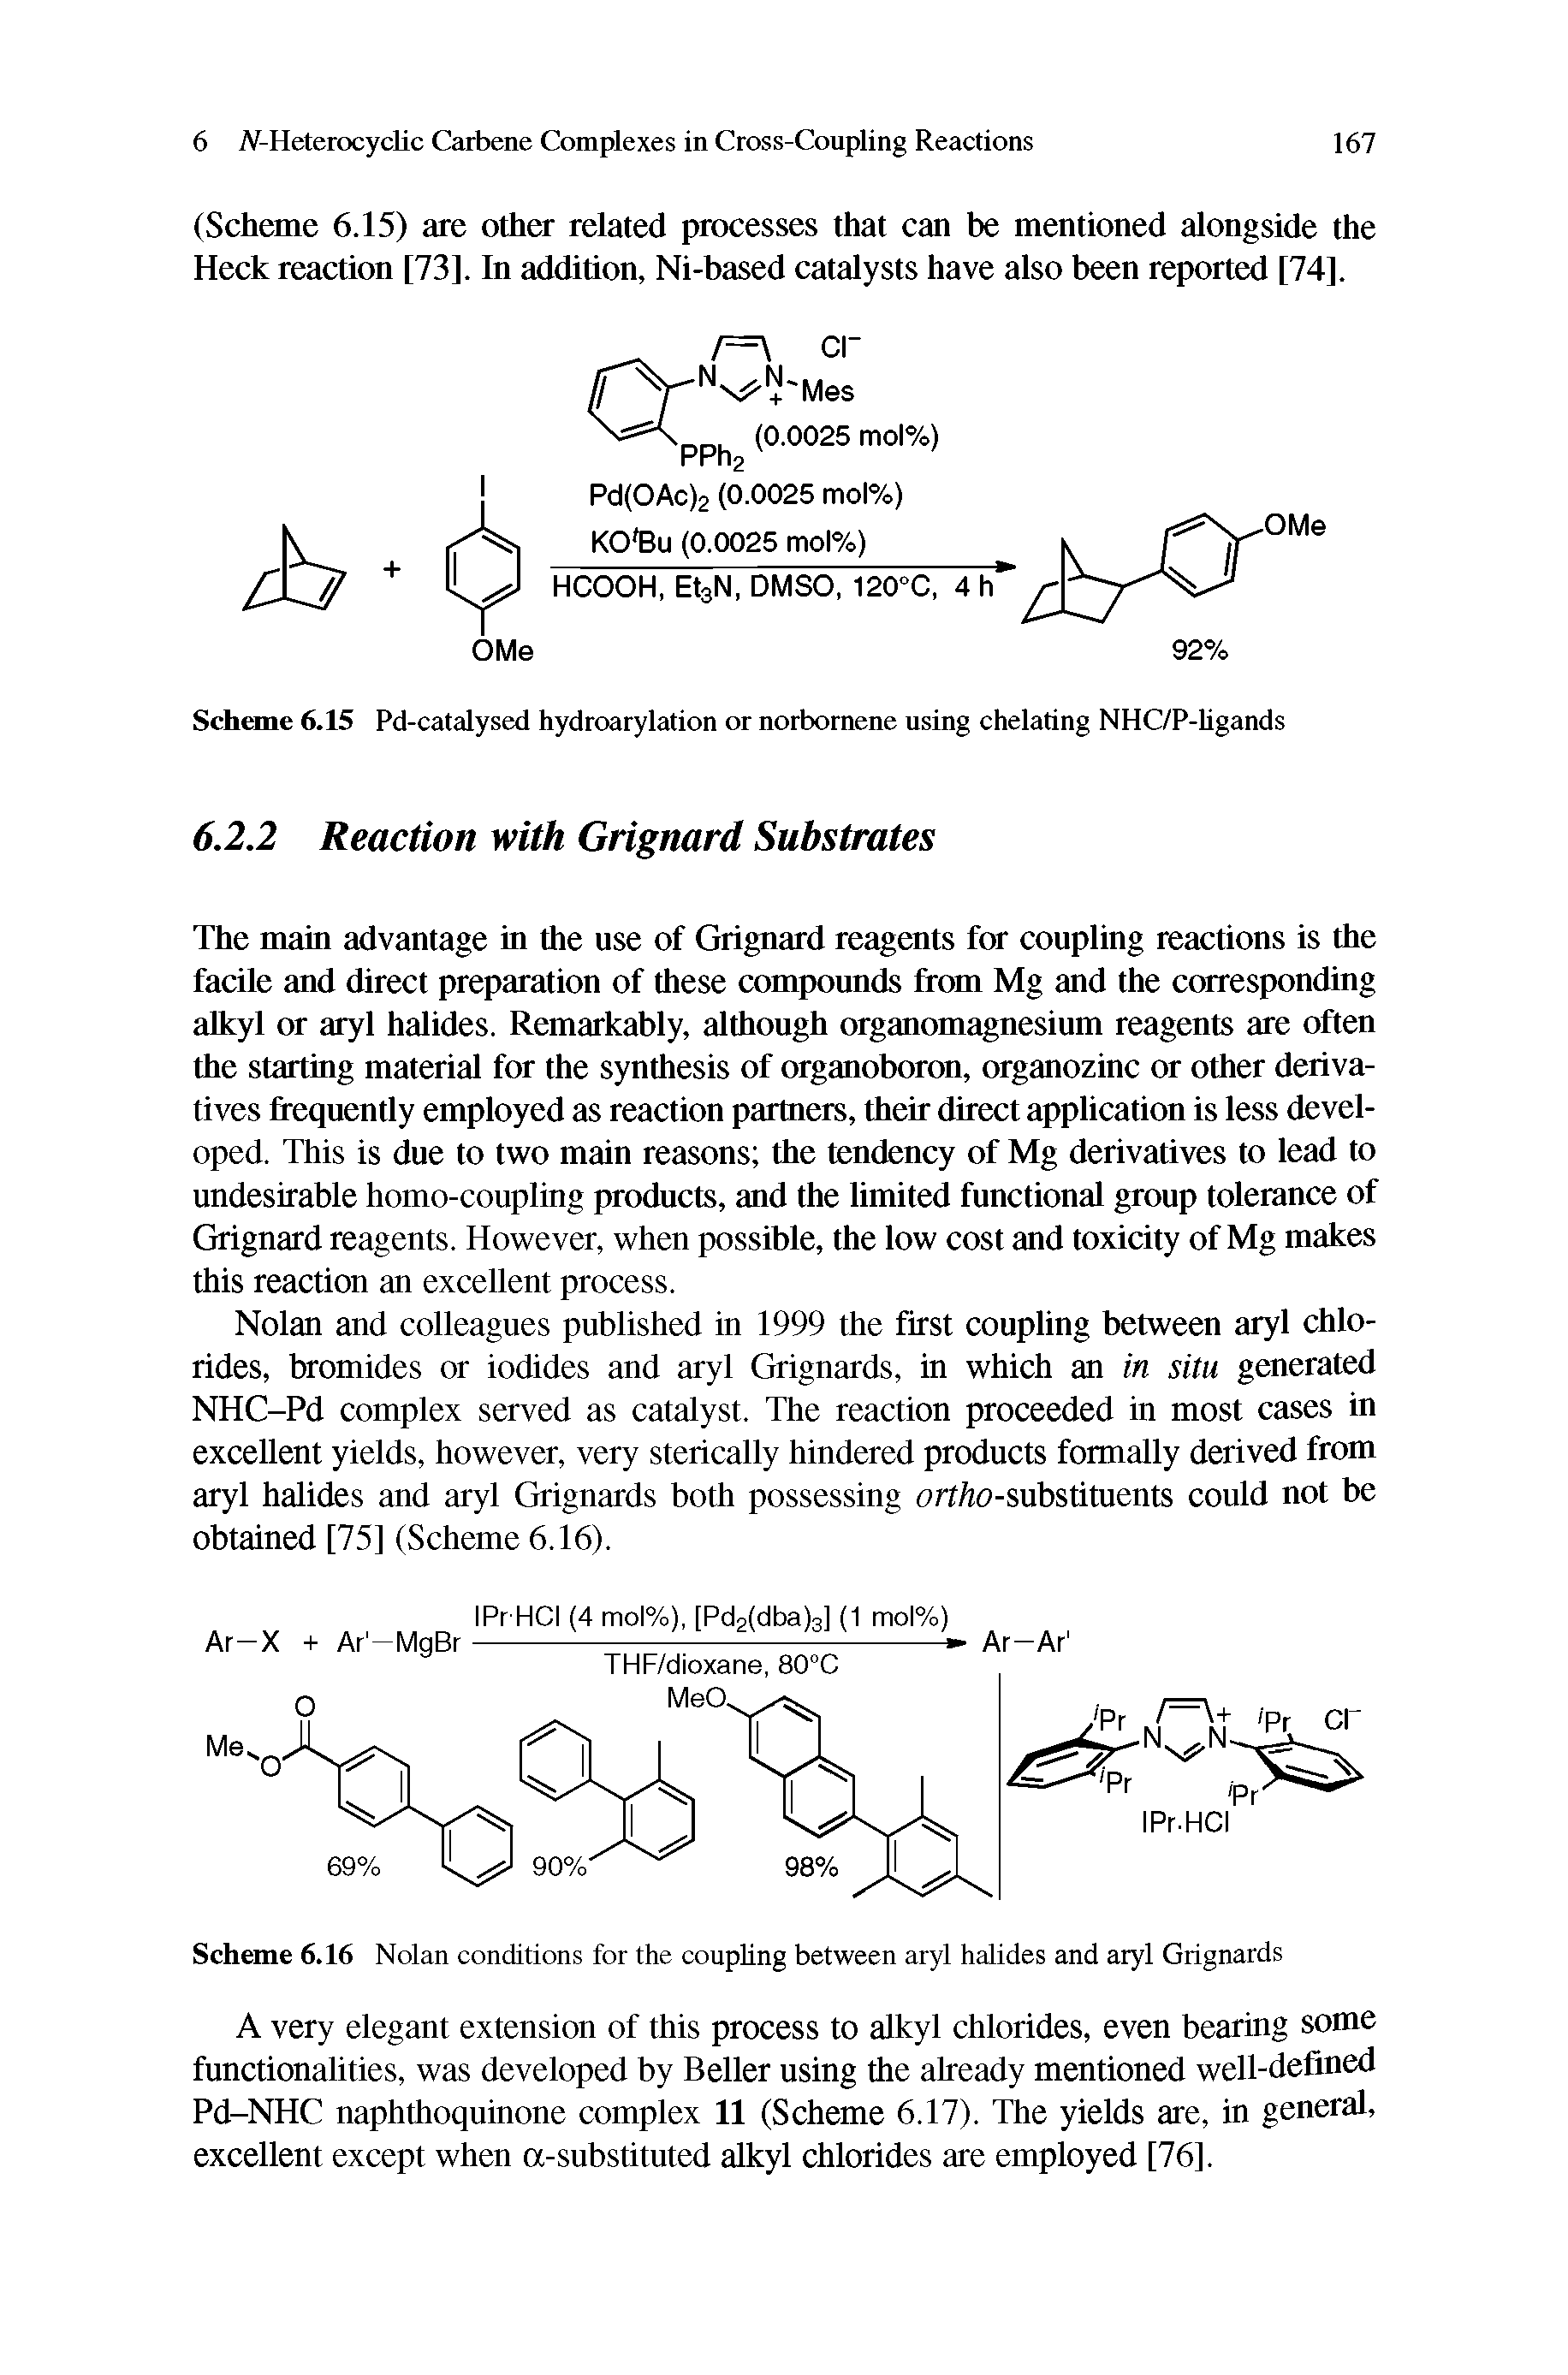 Scheme 6.16 Nolan conditions for the coupling between aryl halides and aryl Grignards...